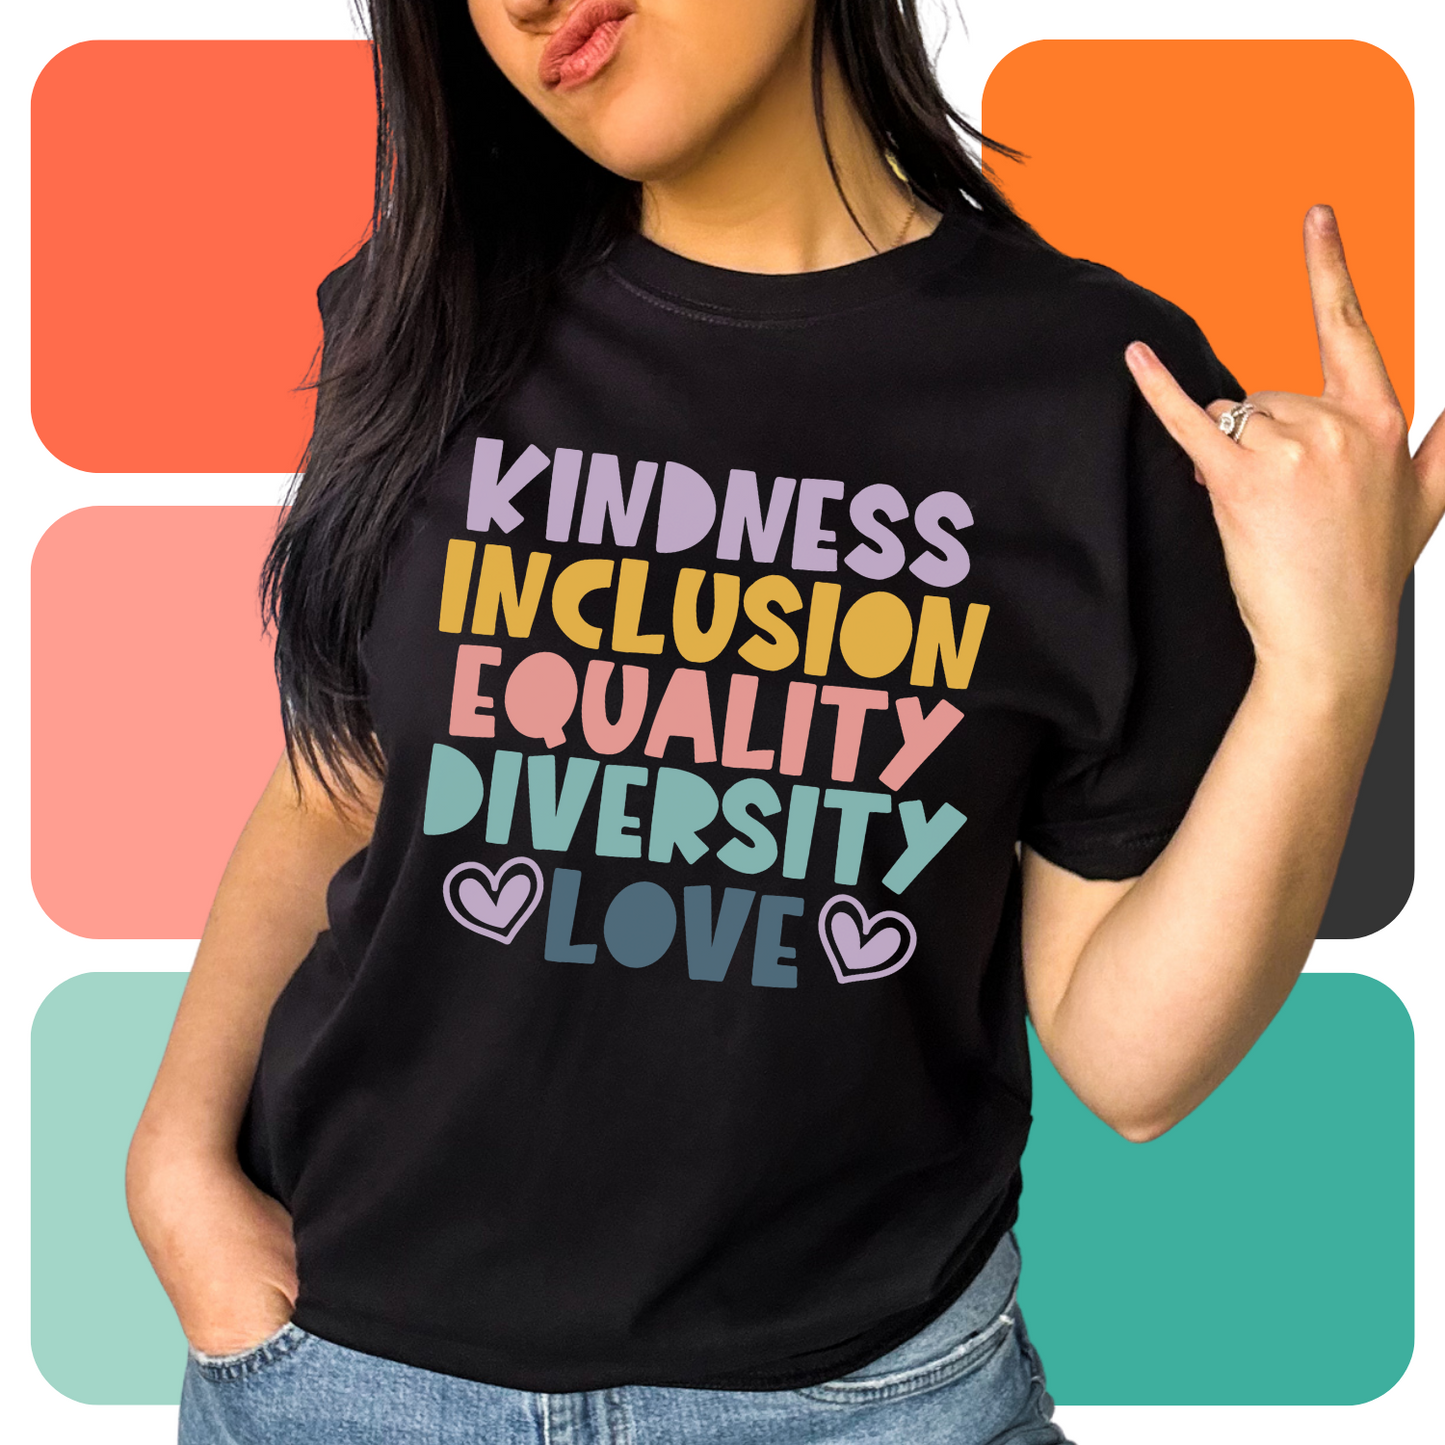 Kindness, eauality, inclusion, diversity, Love tee